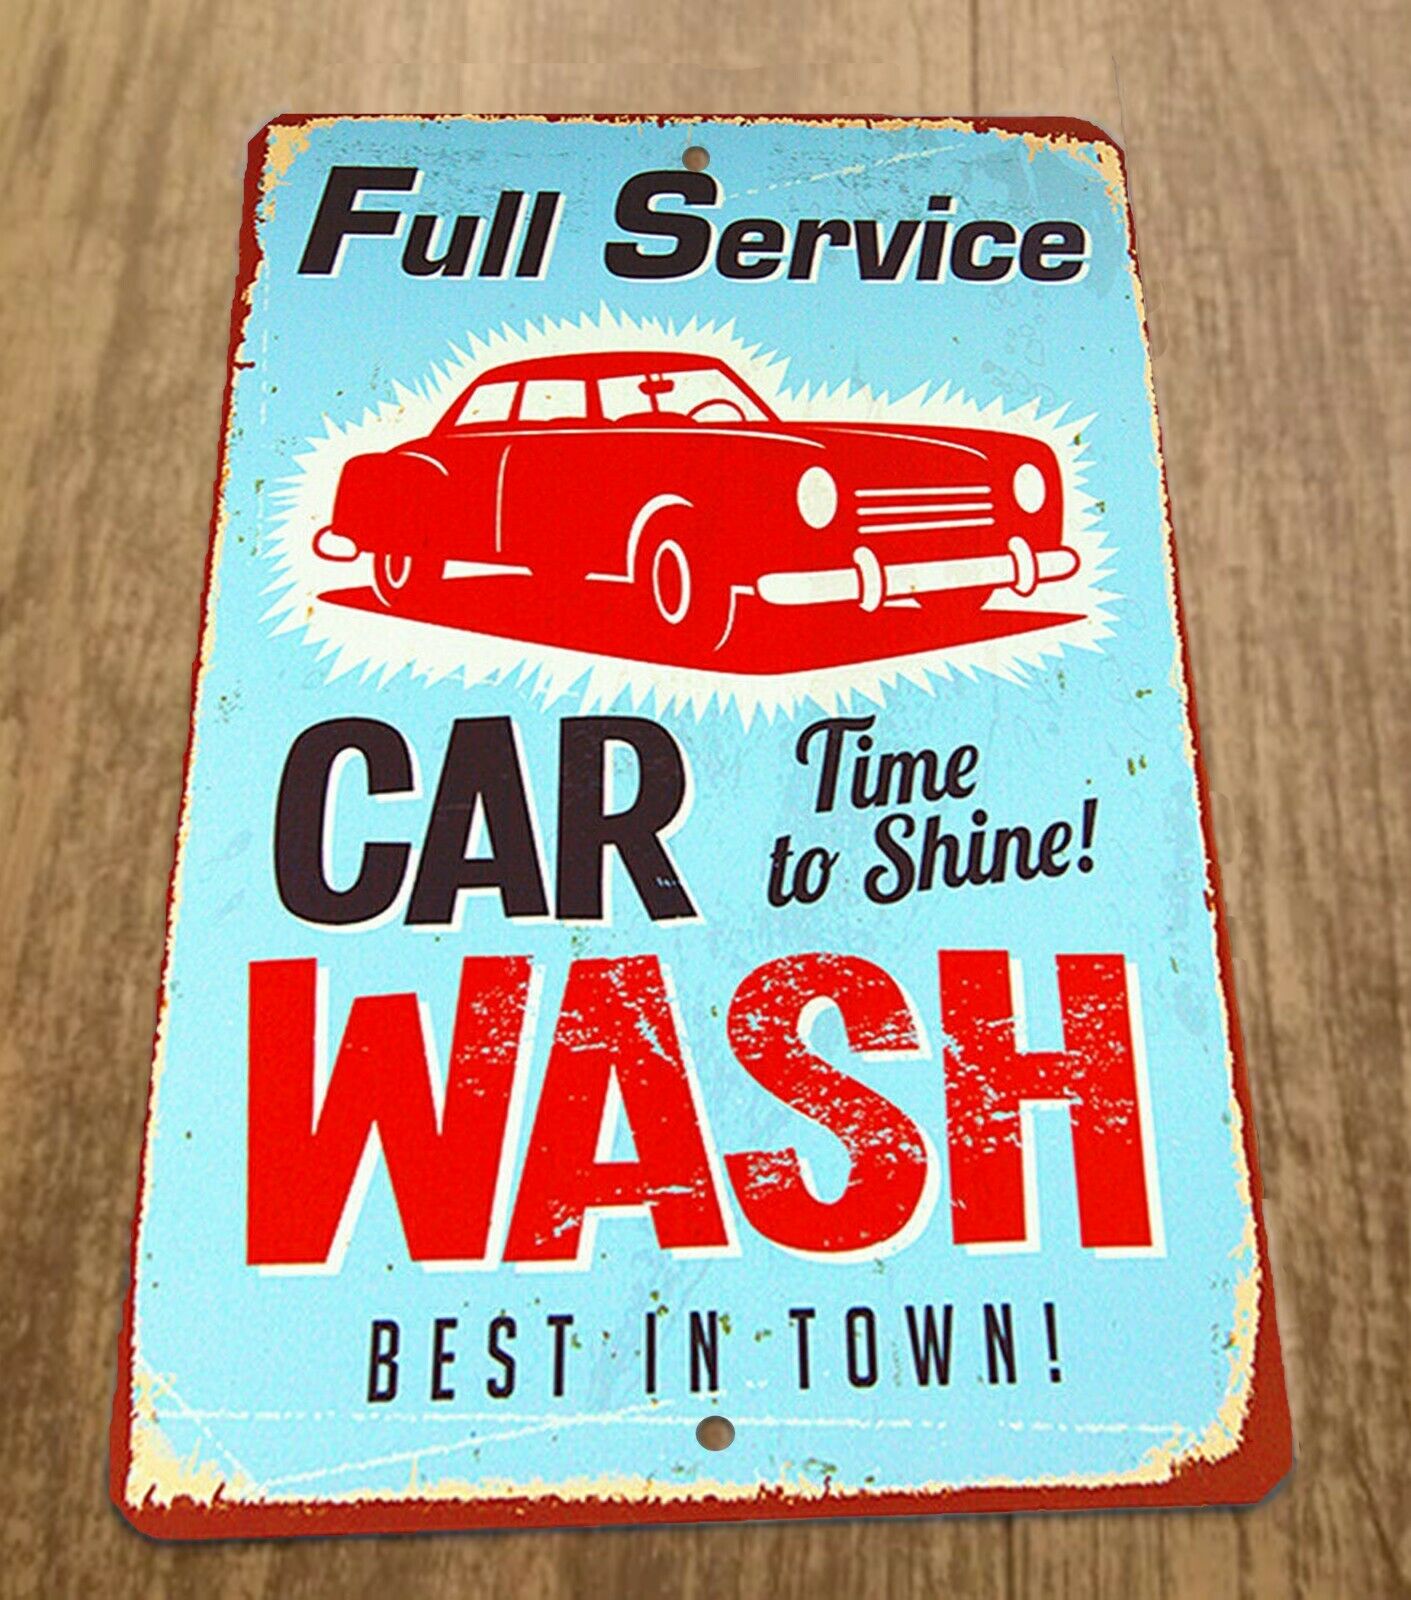 Full Service Car Wash Best in Town 8x12 Metal Wall Car Sign Garage Poster